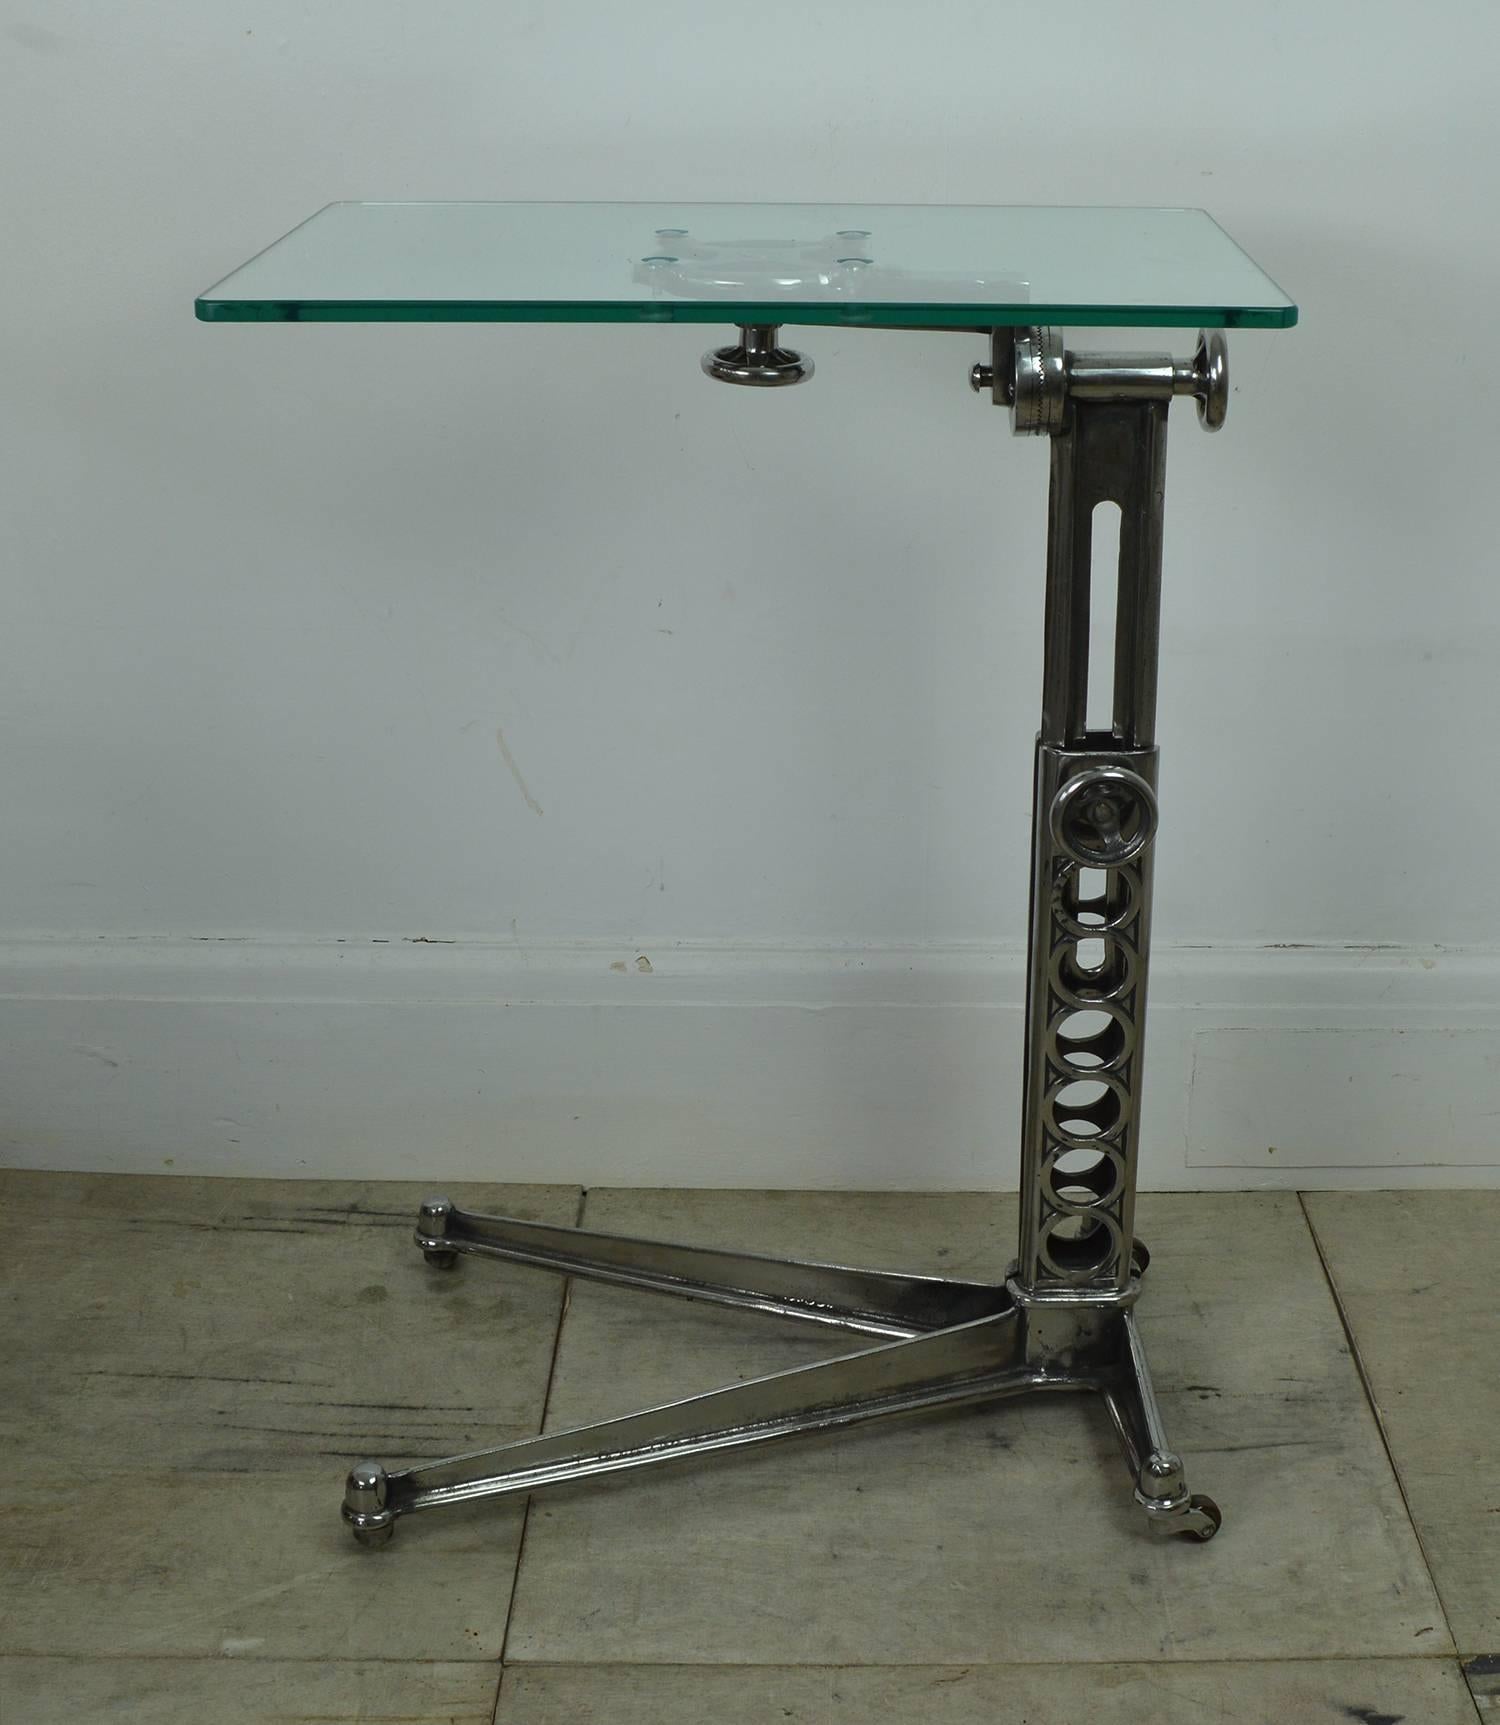 Stylish side or work table with an elegant Industrial look.

Made of cast iron and steel (recently highly polished) with a new toughened glass top.

Original pot castors.

The top is adjustable to a maximum of 37 inches (95 cm). It is easily